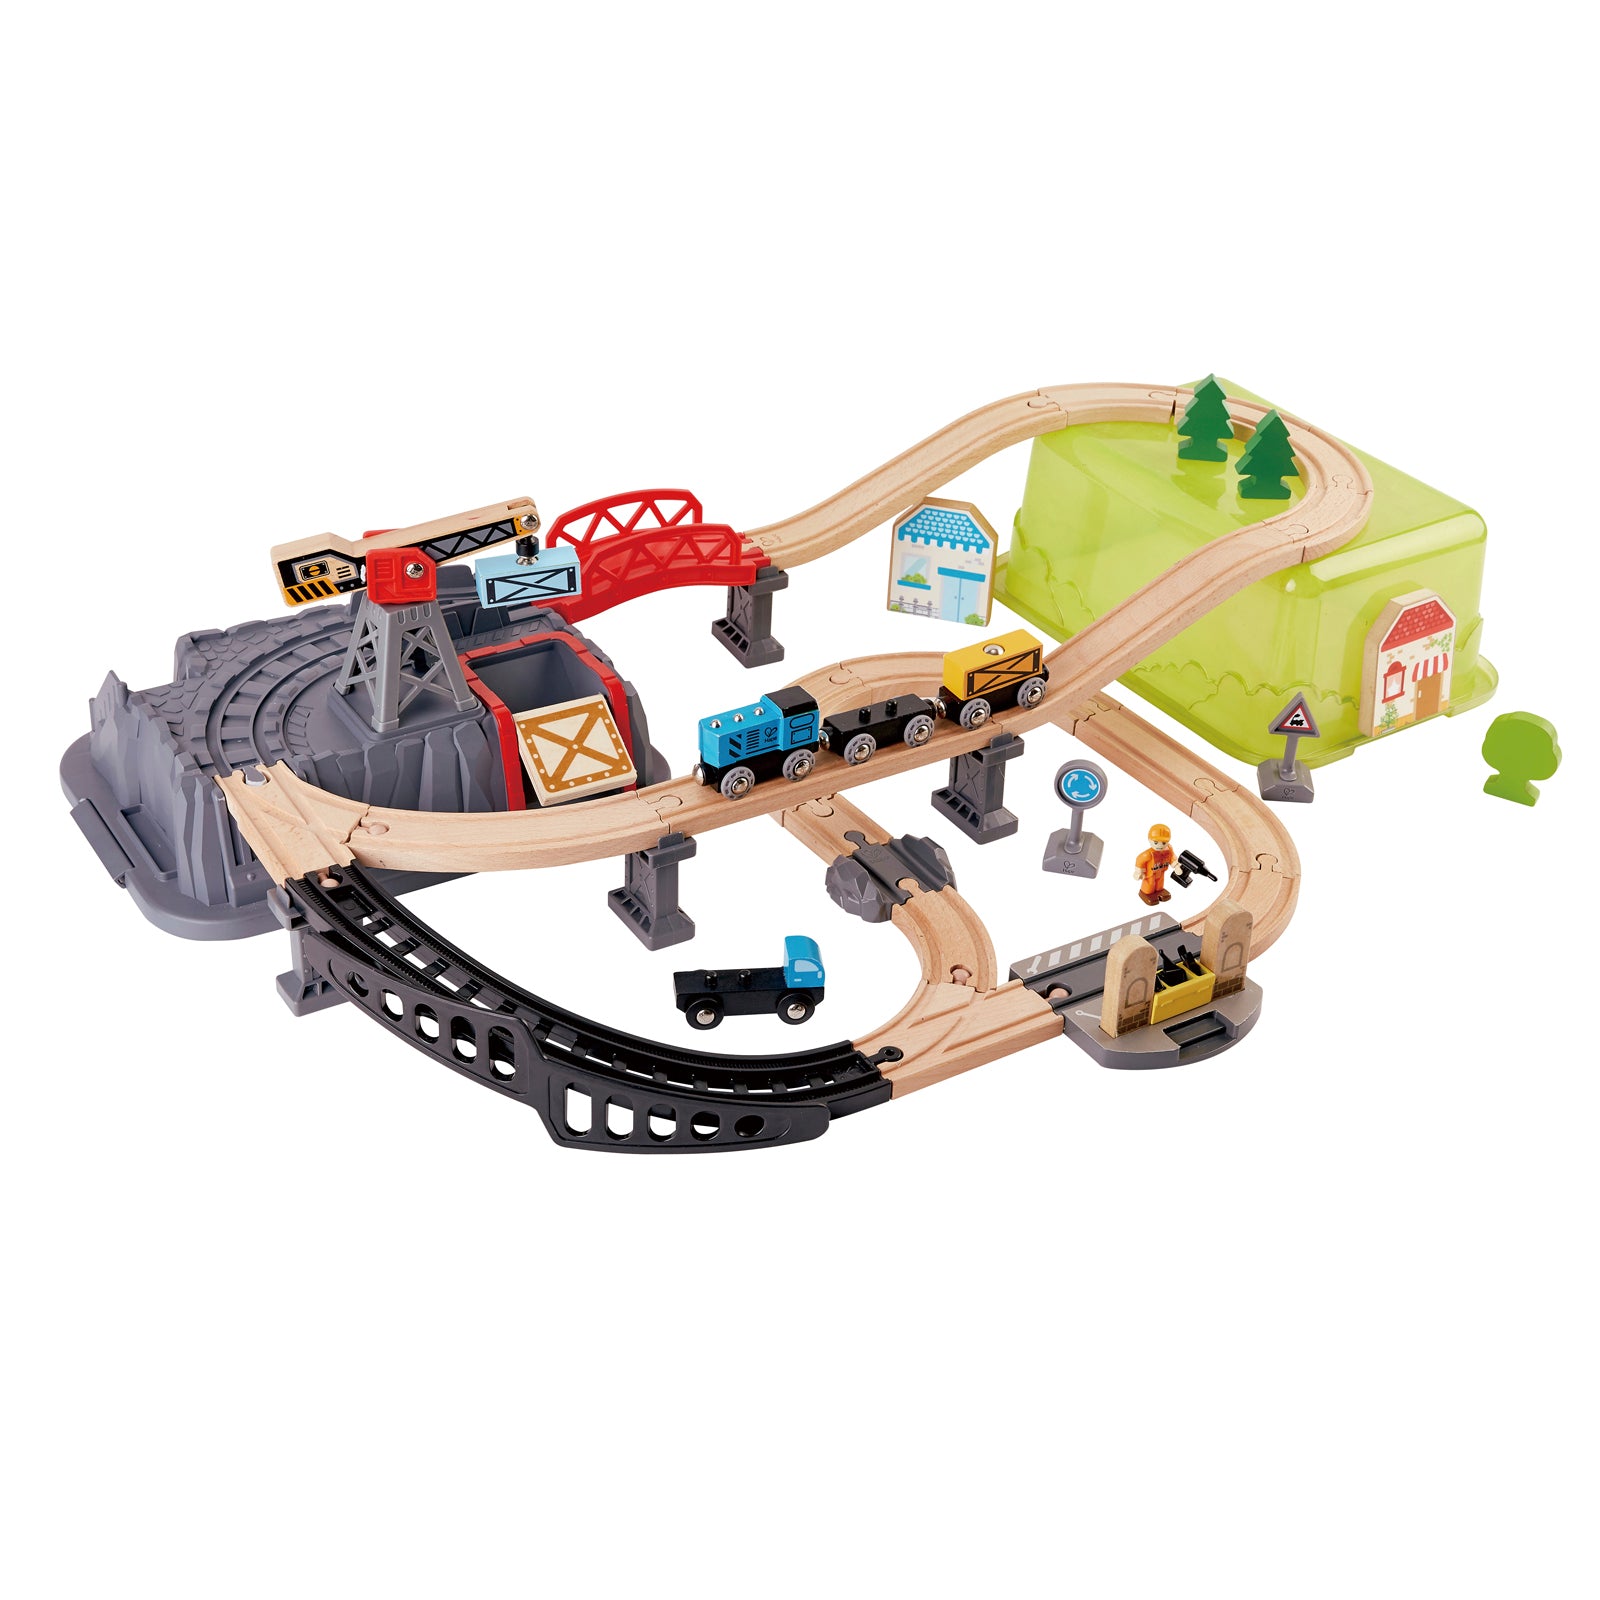 Wooden train tracks set up on green and gray storage bins. Blue engine pulling two train cars on tracks.